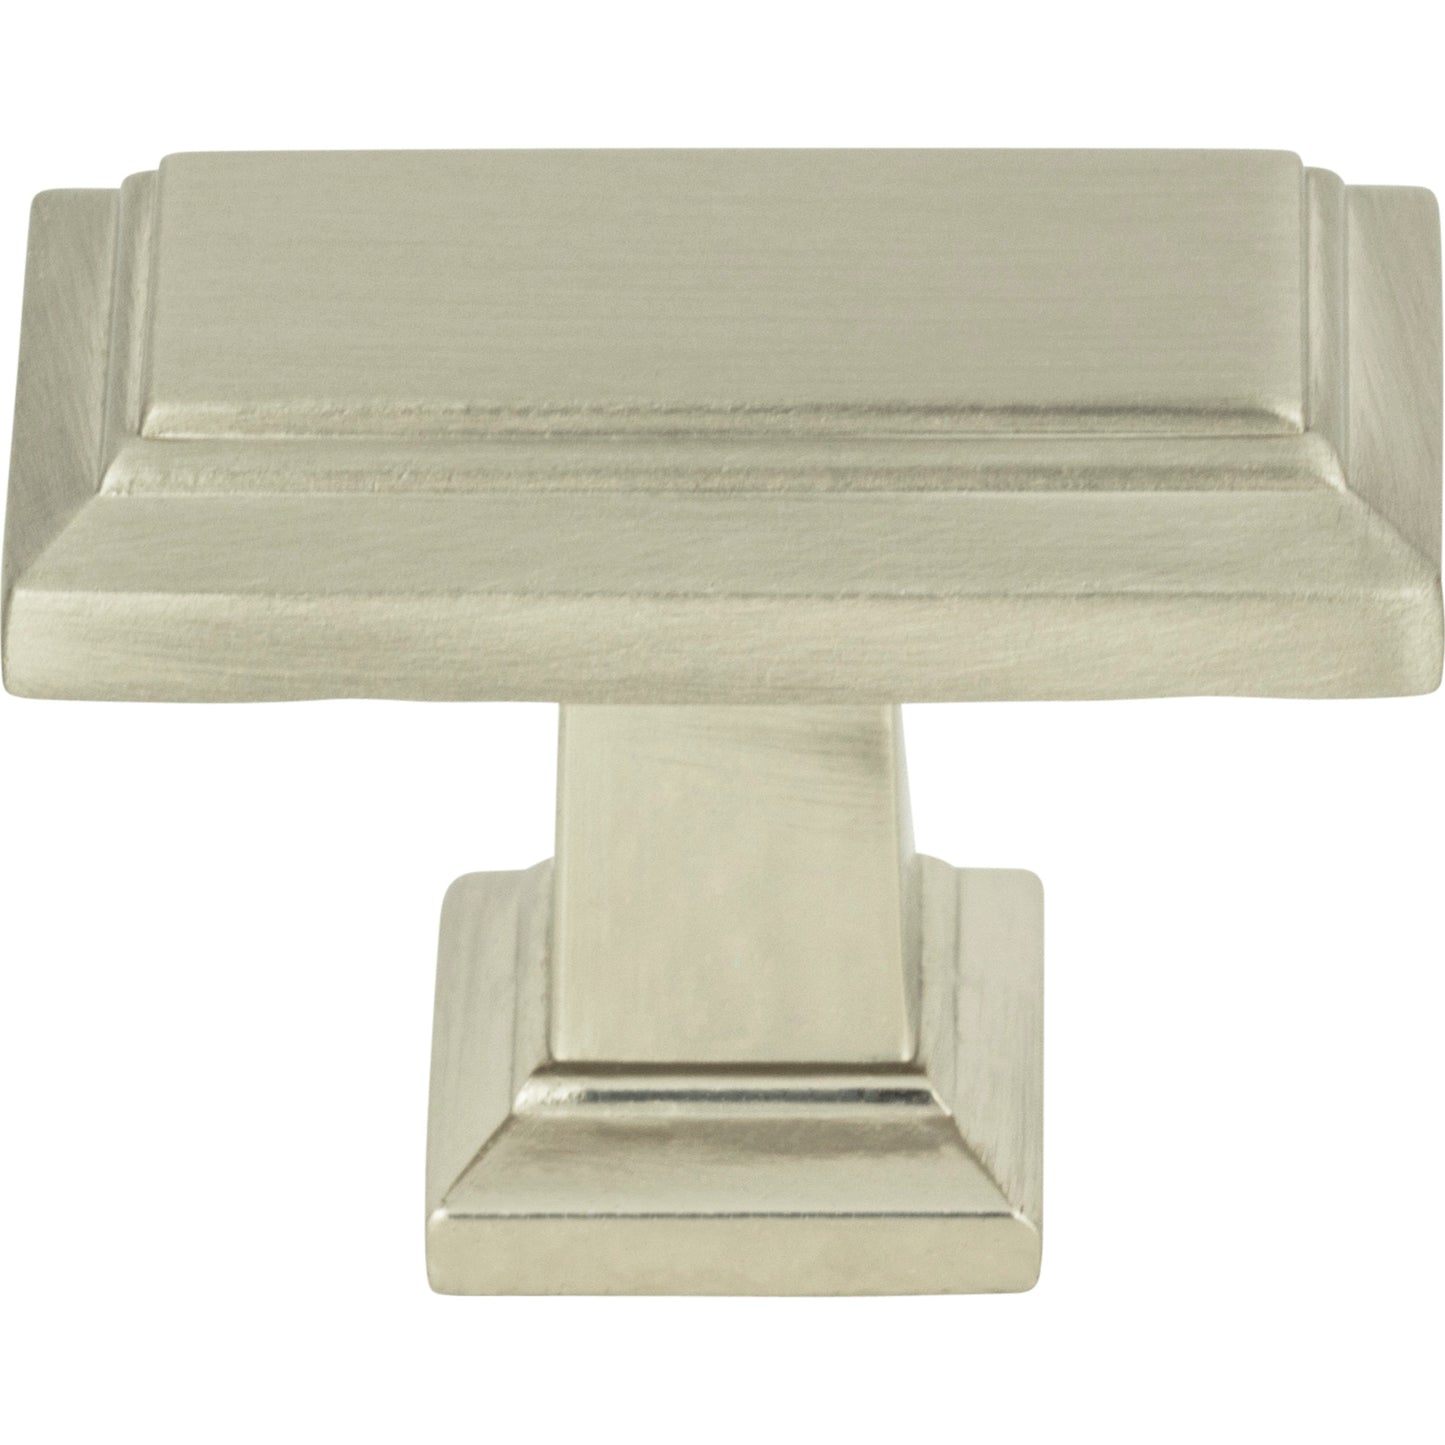 ATLAS 290-BRN Sutton Place Rectangle Knob 1 7/16 Inch Brushed Nickel